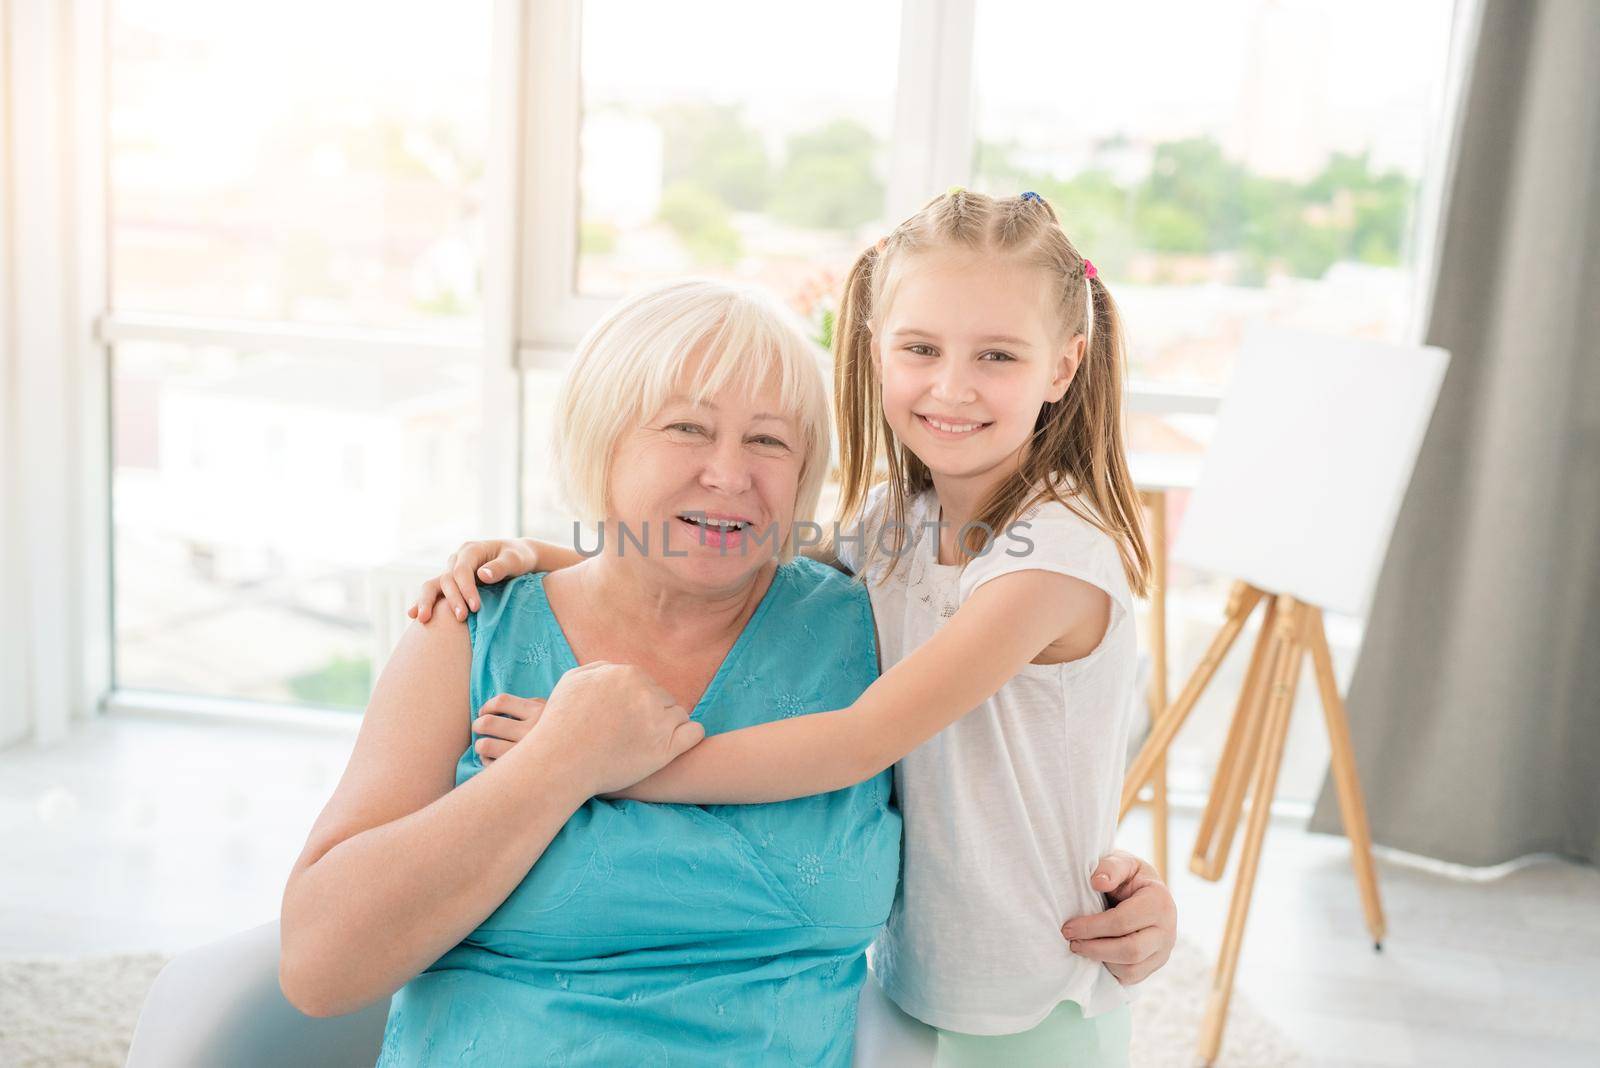 Cute little girl embracing smiling granny in light room